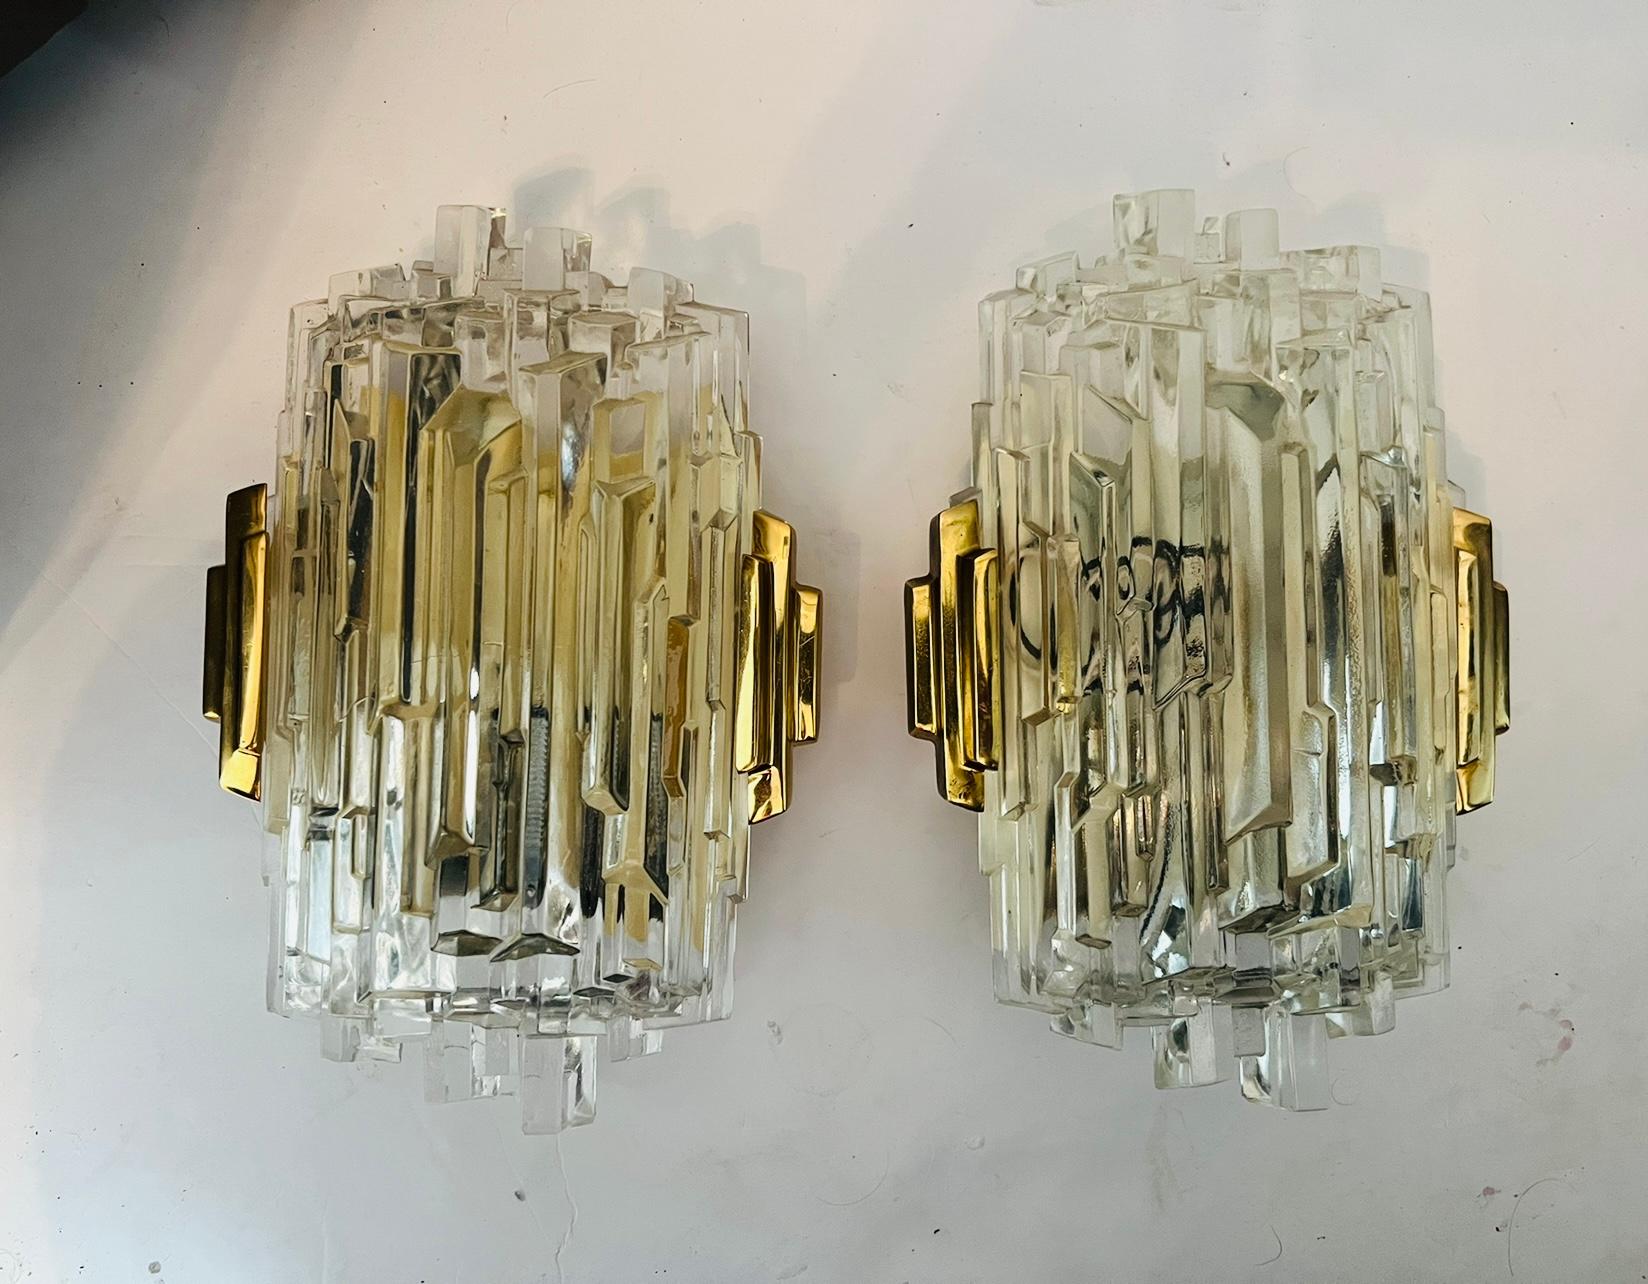 Pair of luxurious 1970s High Style wall lights composed of golden brass fittings and ice crystal glass shades. Newly rewired. Candelabra sockets.